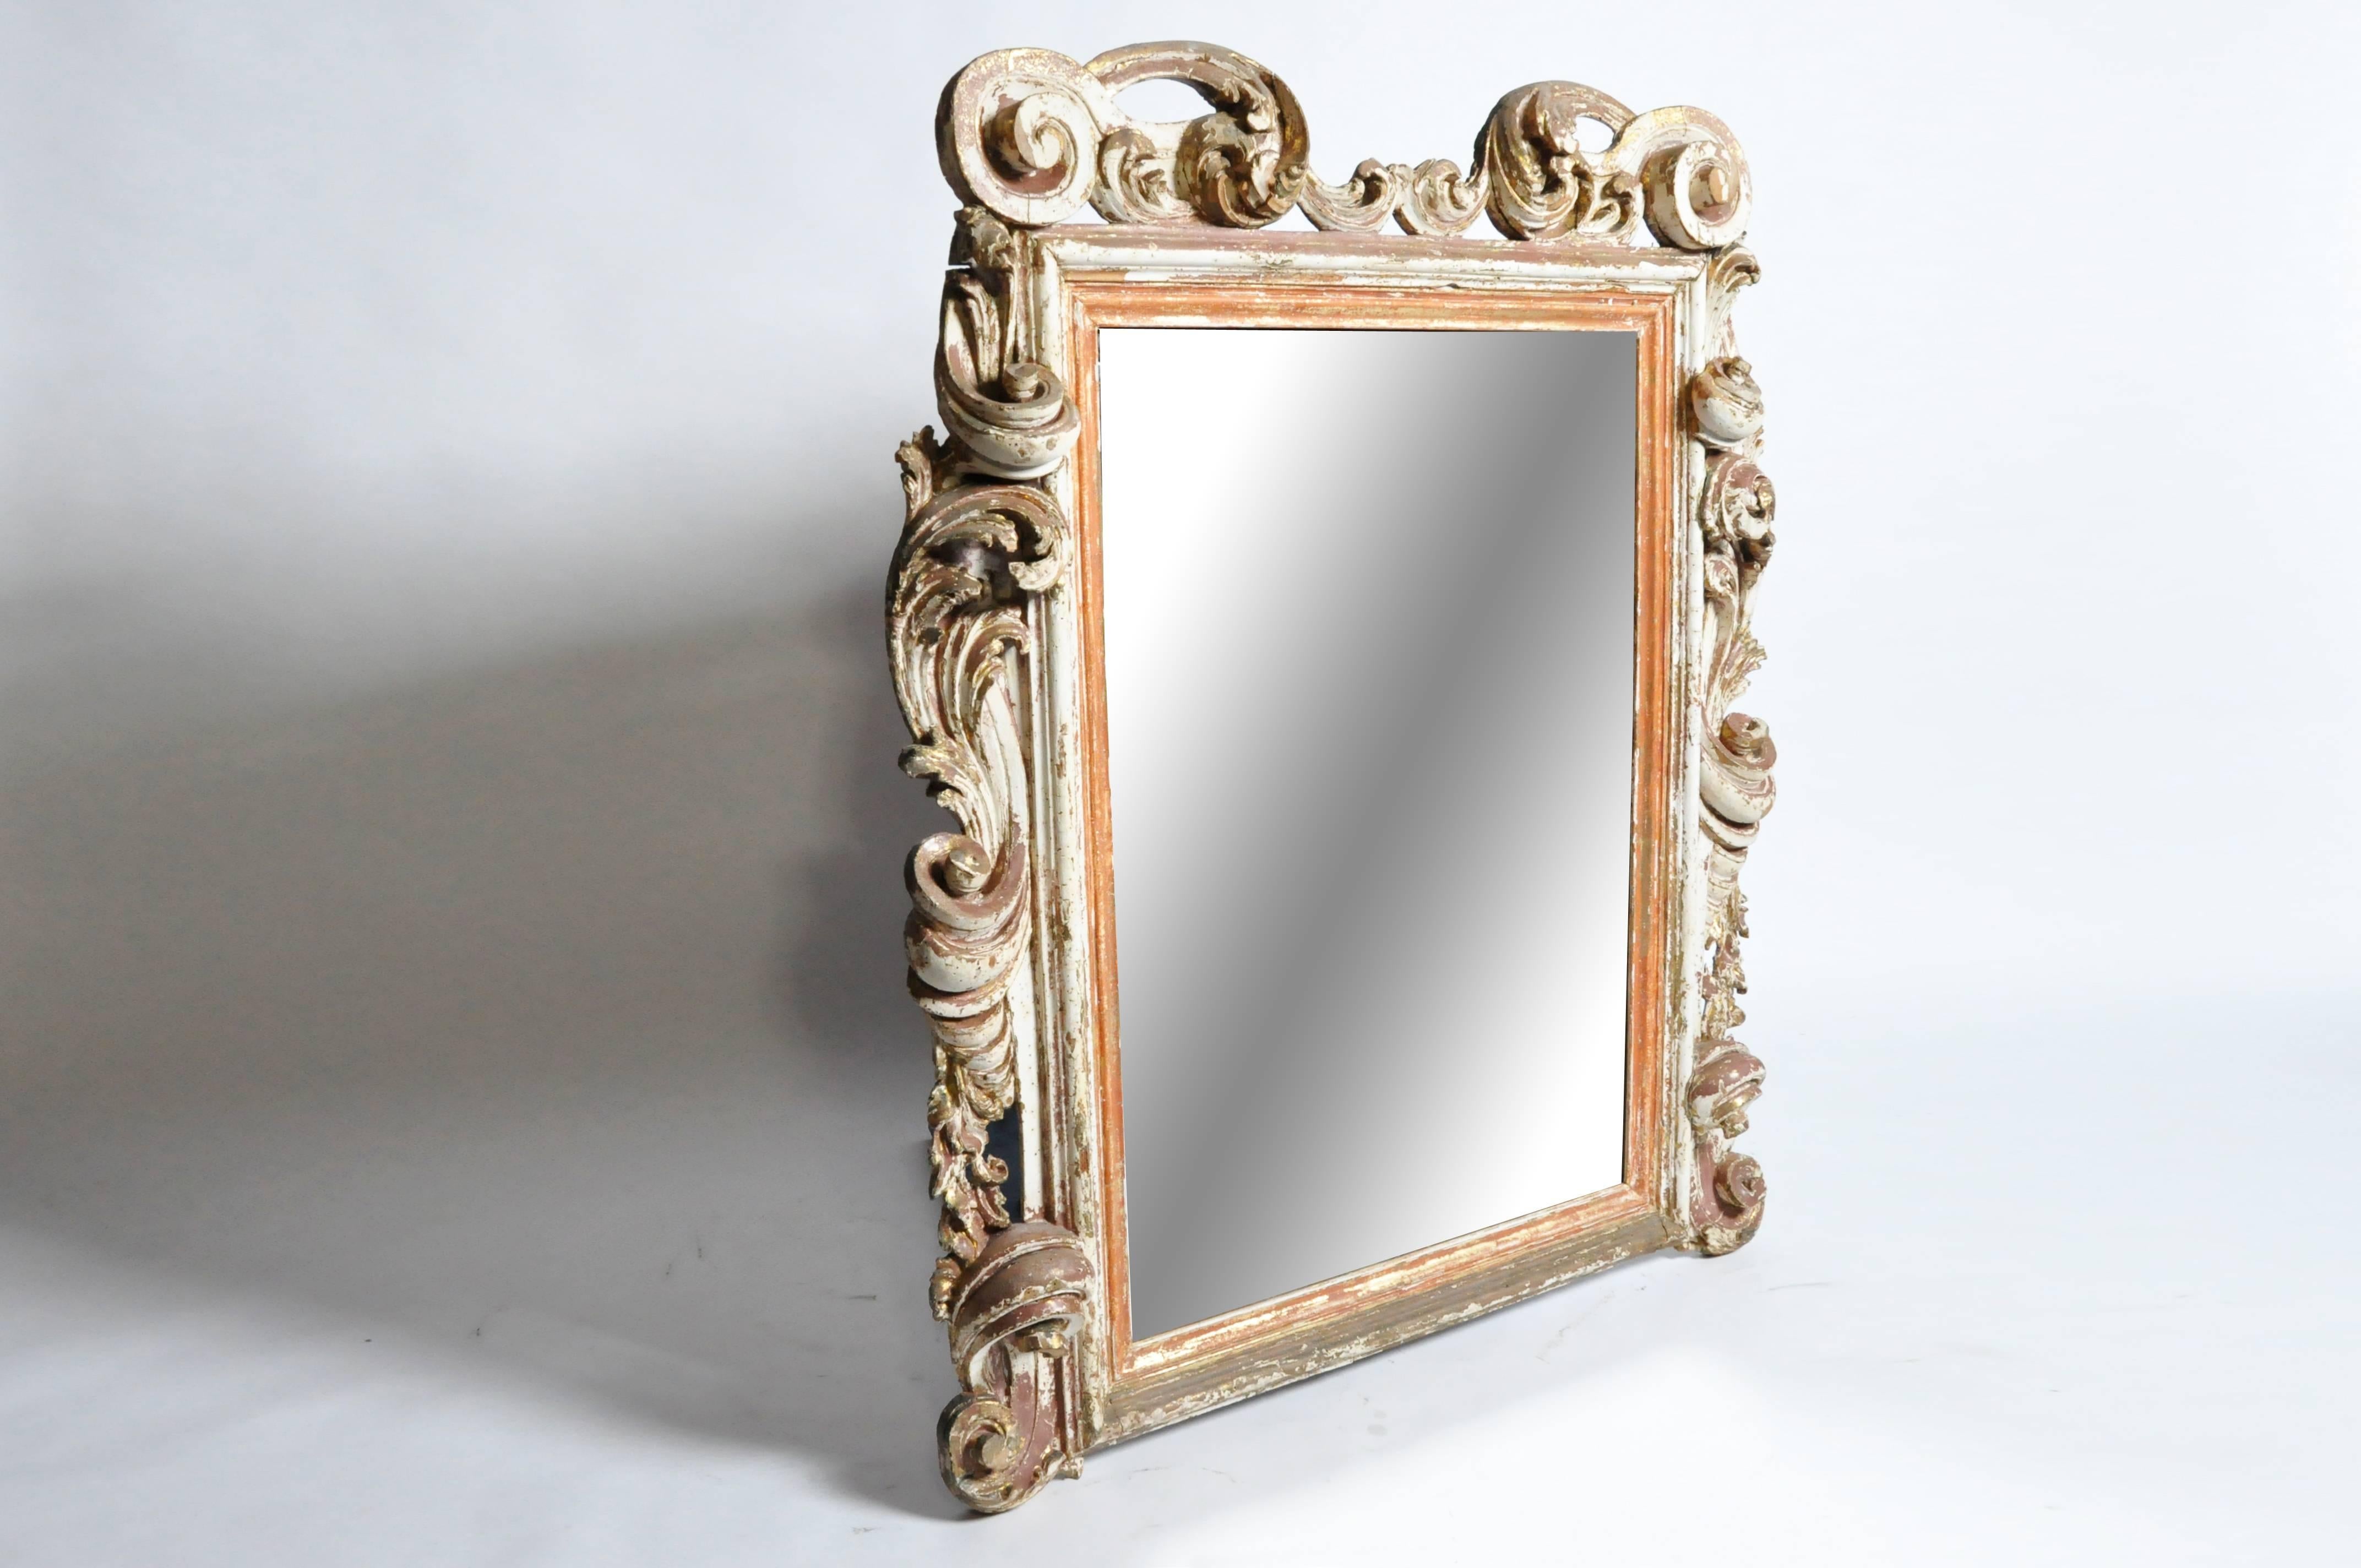 This elegant early 19th Century mirror is from Italy and was made from pine wood, gold leaf, and red and white pigments, c. 1800. This mirror features beautiful carved scroll-work around the mirror.